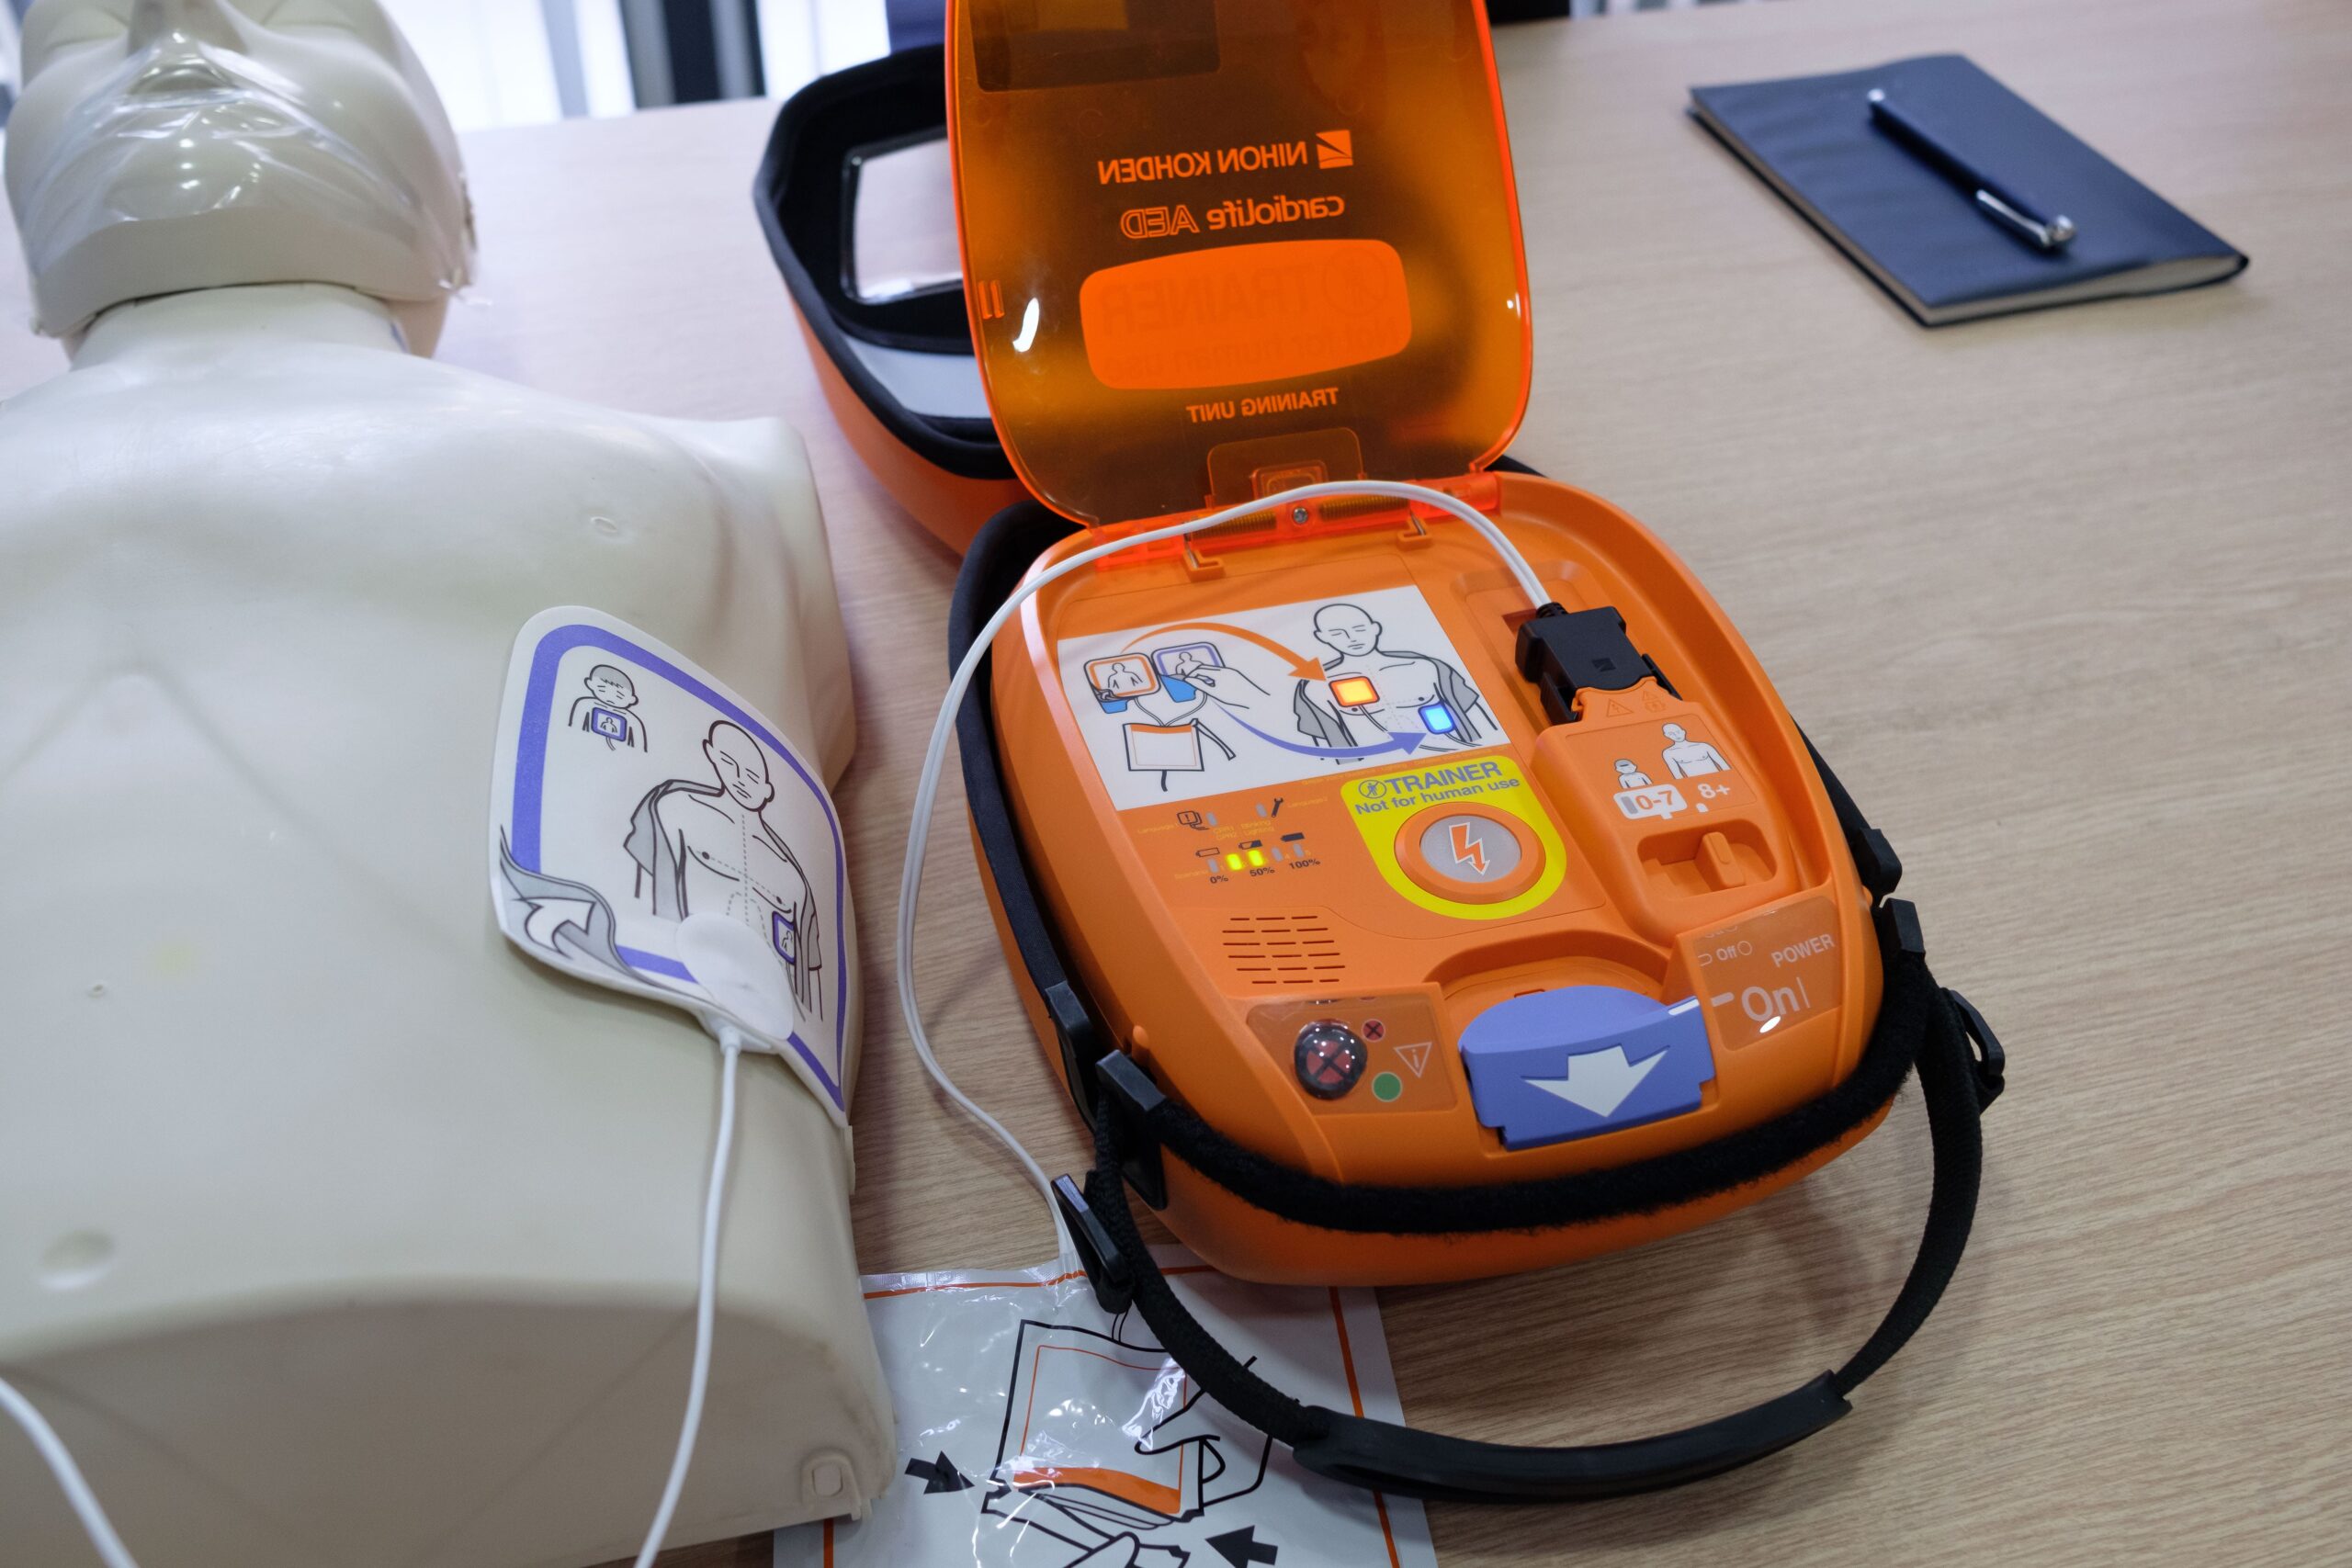 What is the effect of AED (Automated External Defibrillator)? Introducing merits based on emergency cases.